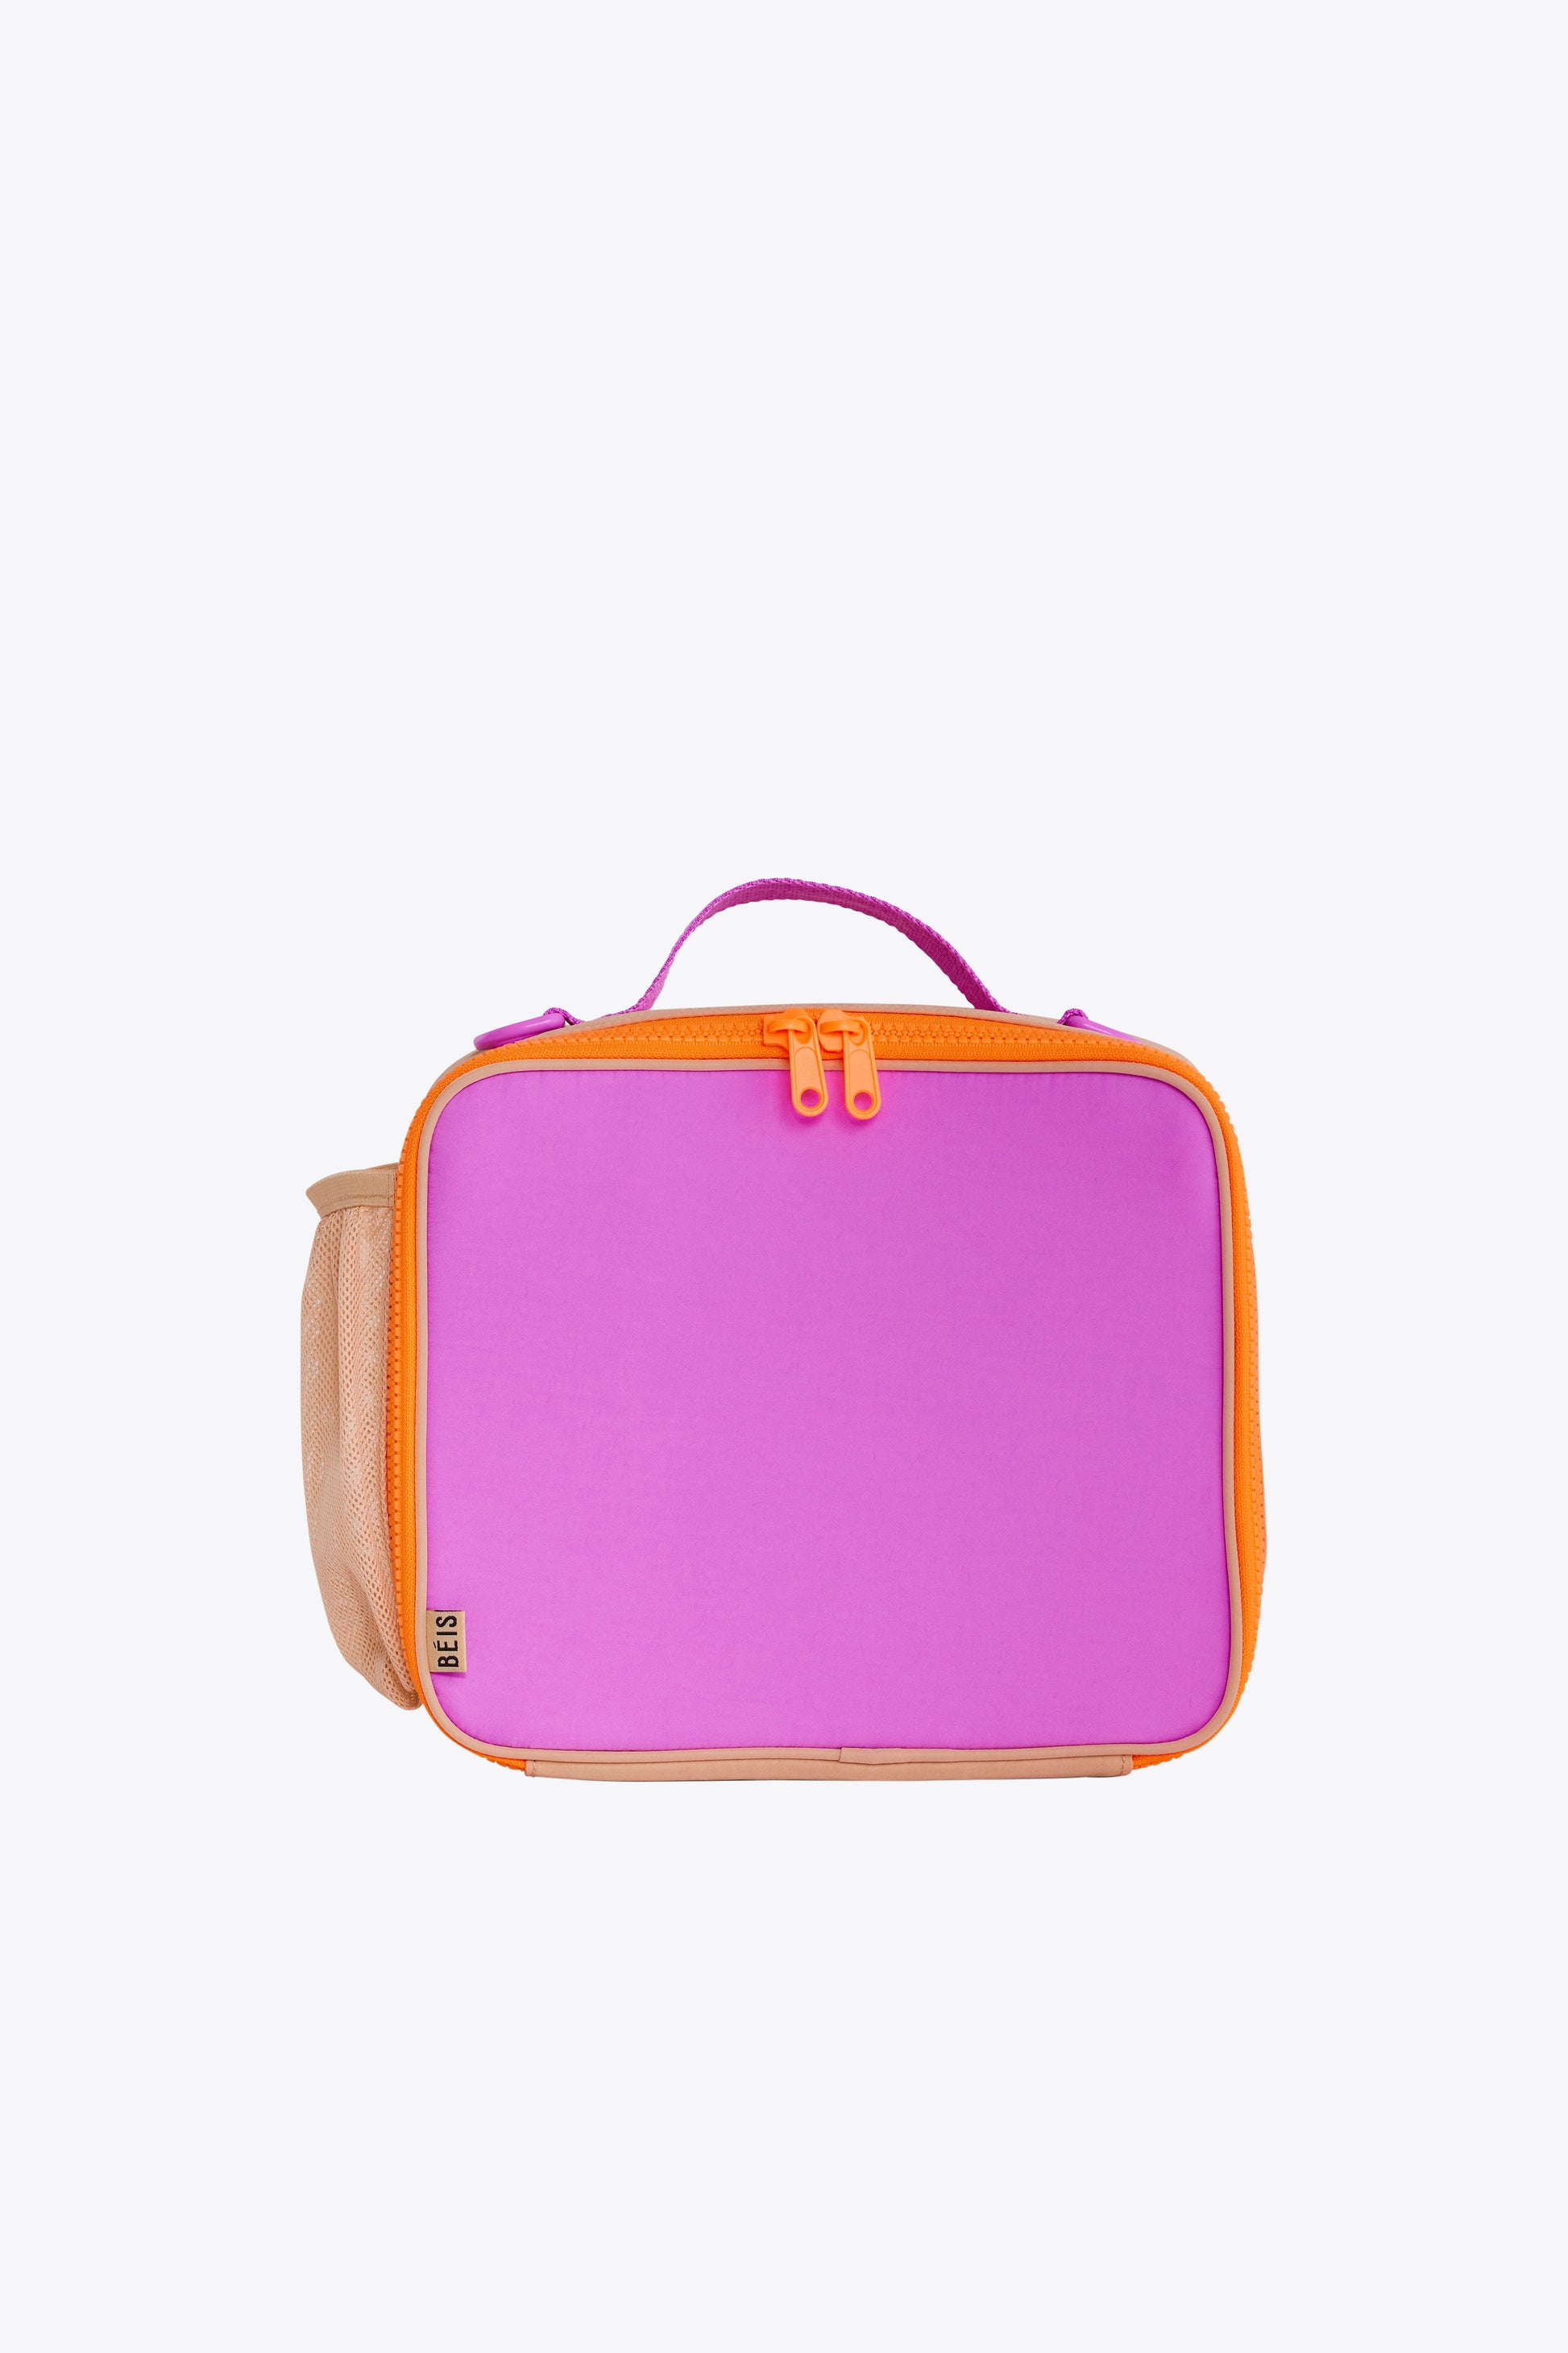 Kids Matching Backpack And Lunch Box Sets